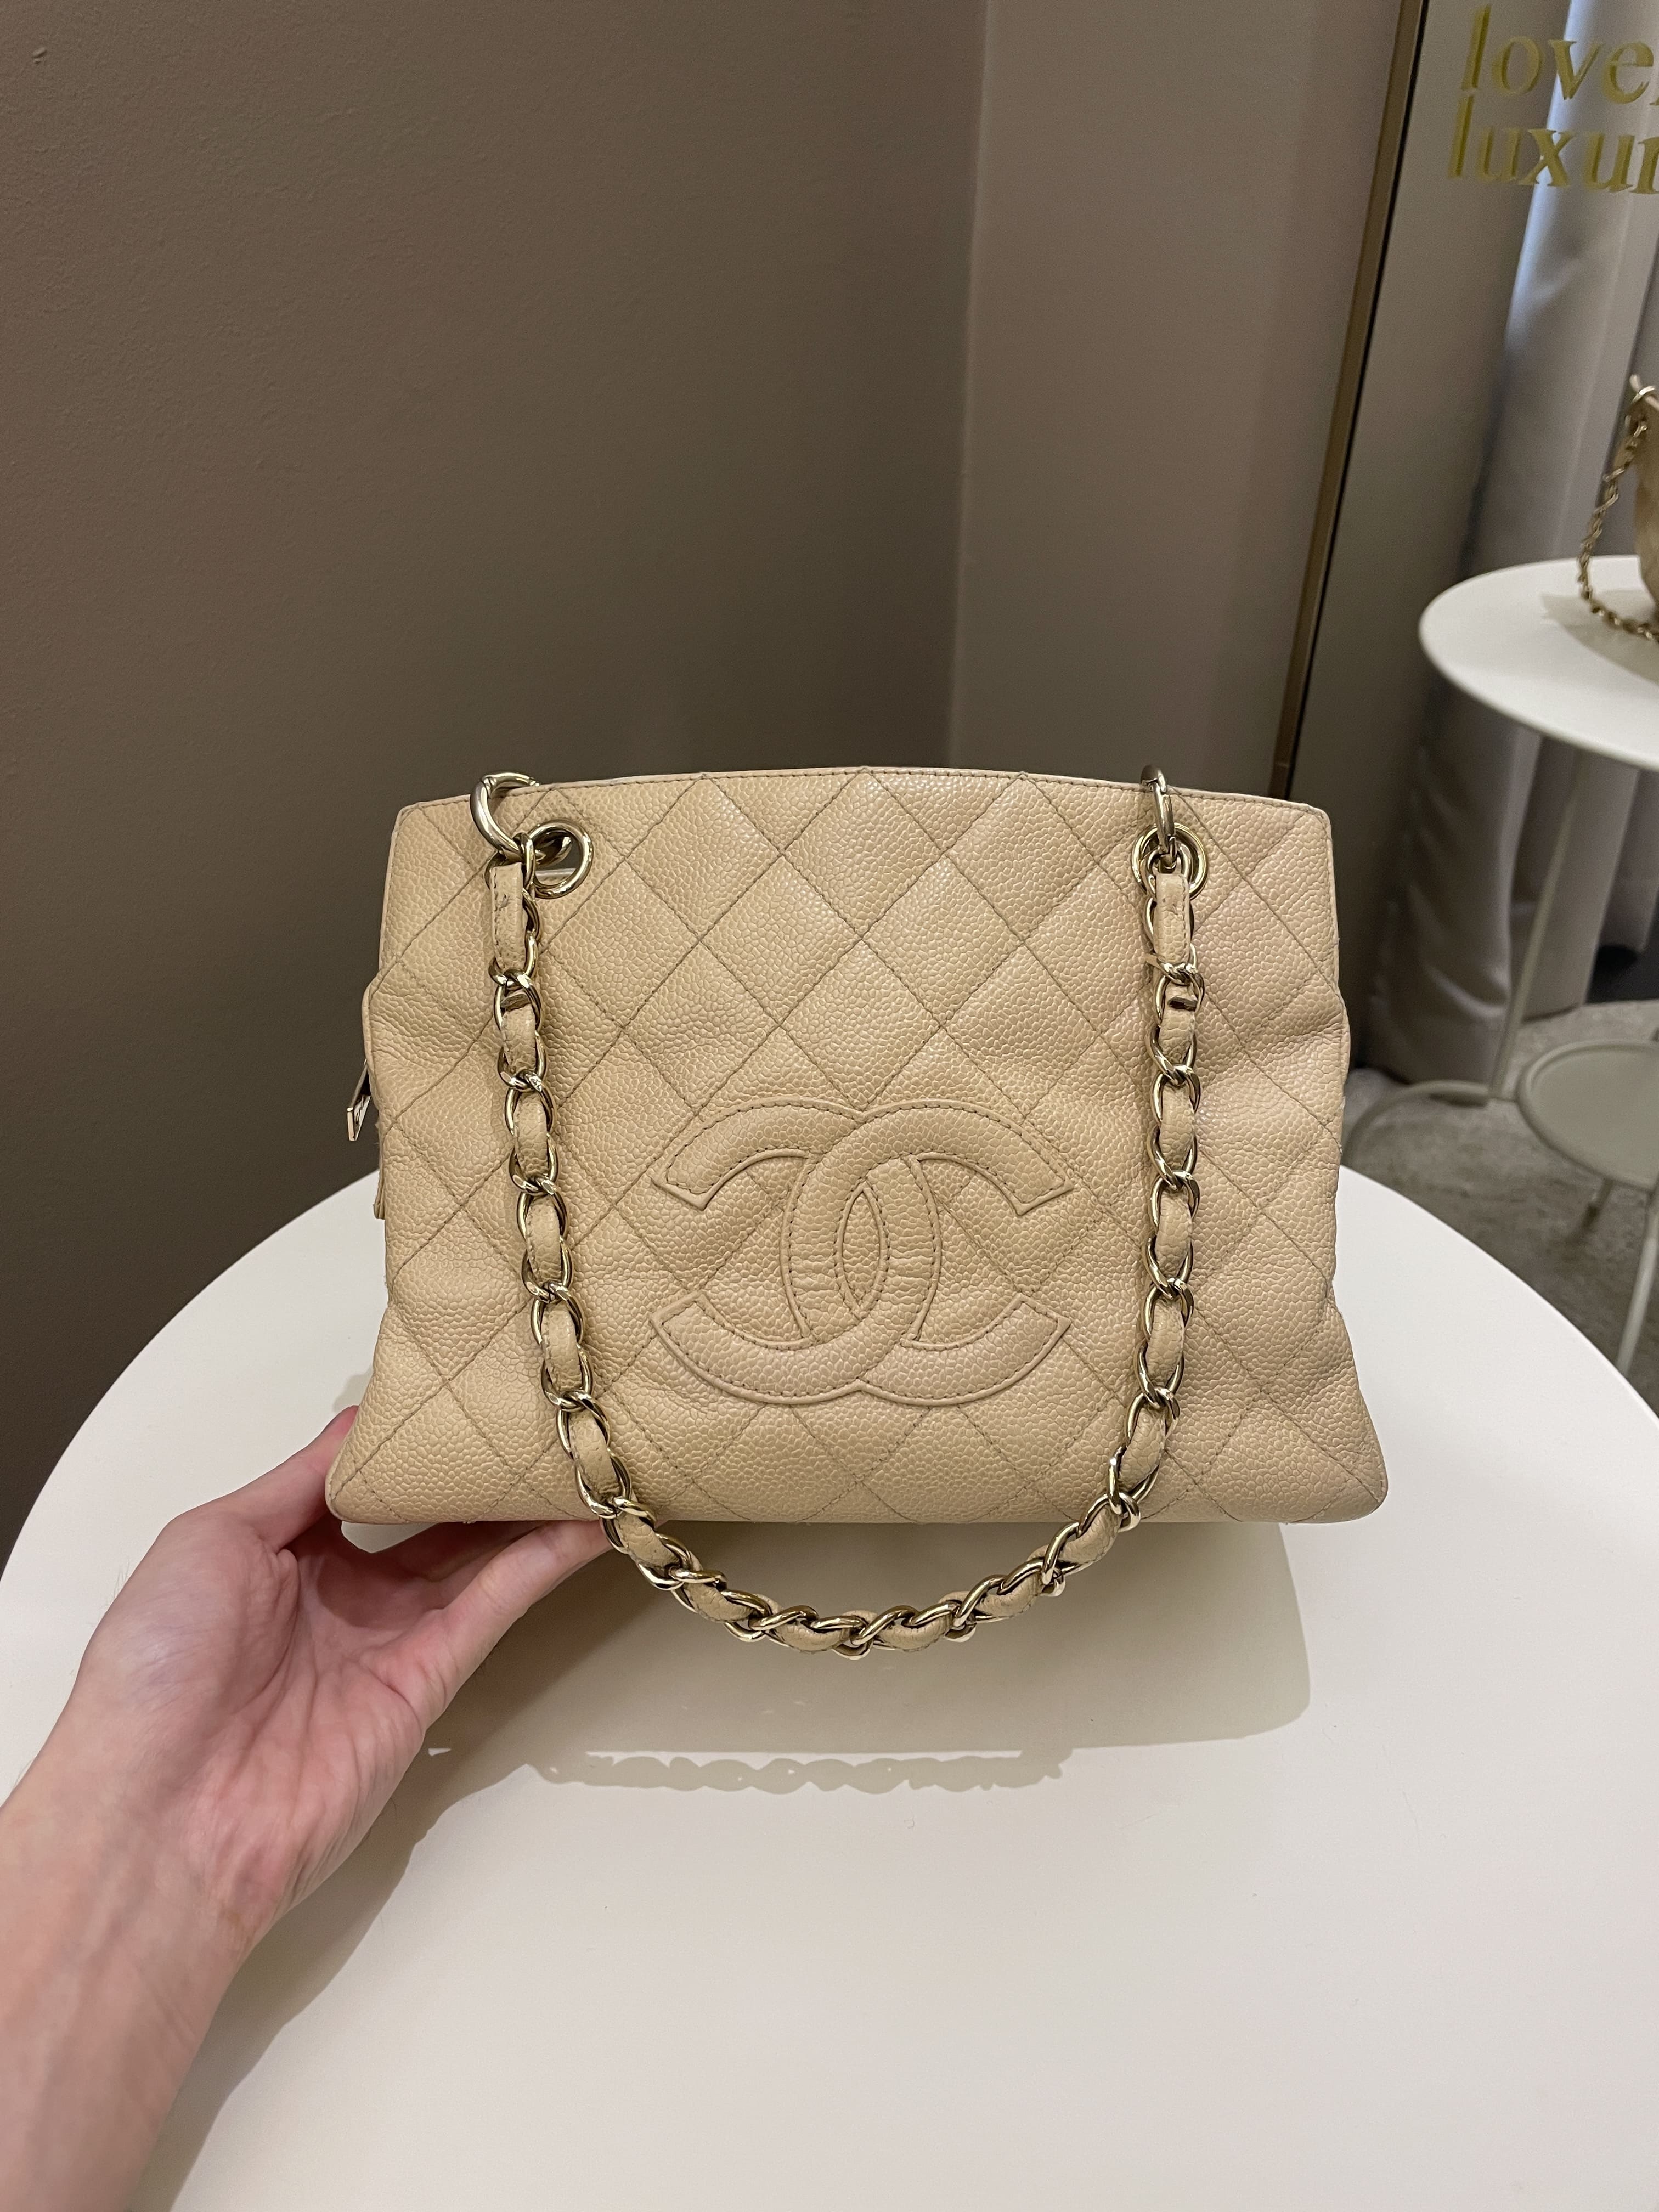 CHANEL, Bags, Authentic Chanel Petite Timeless Tote New Style